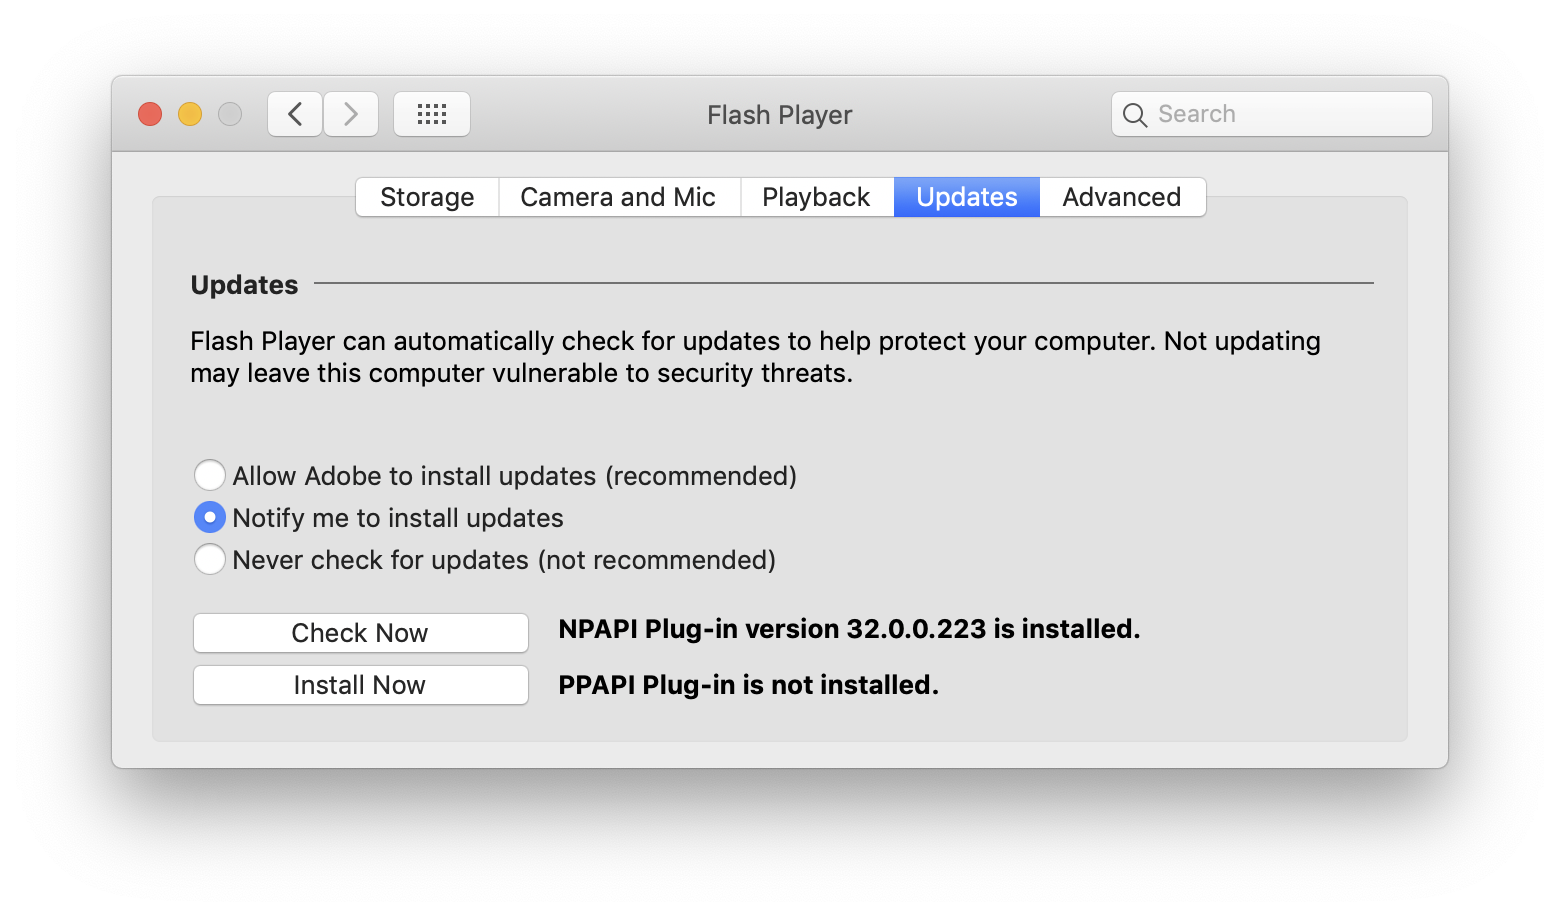 geschiedenis Accumulatie groep How to tell if an Adobe Flash Player update is valid - The Mac Security Blog